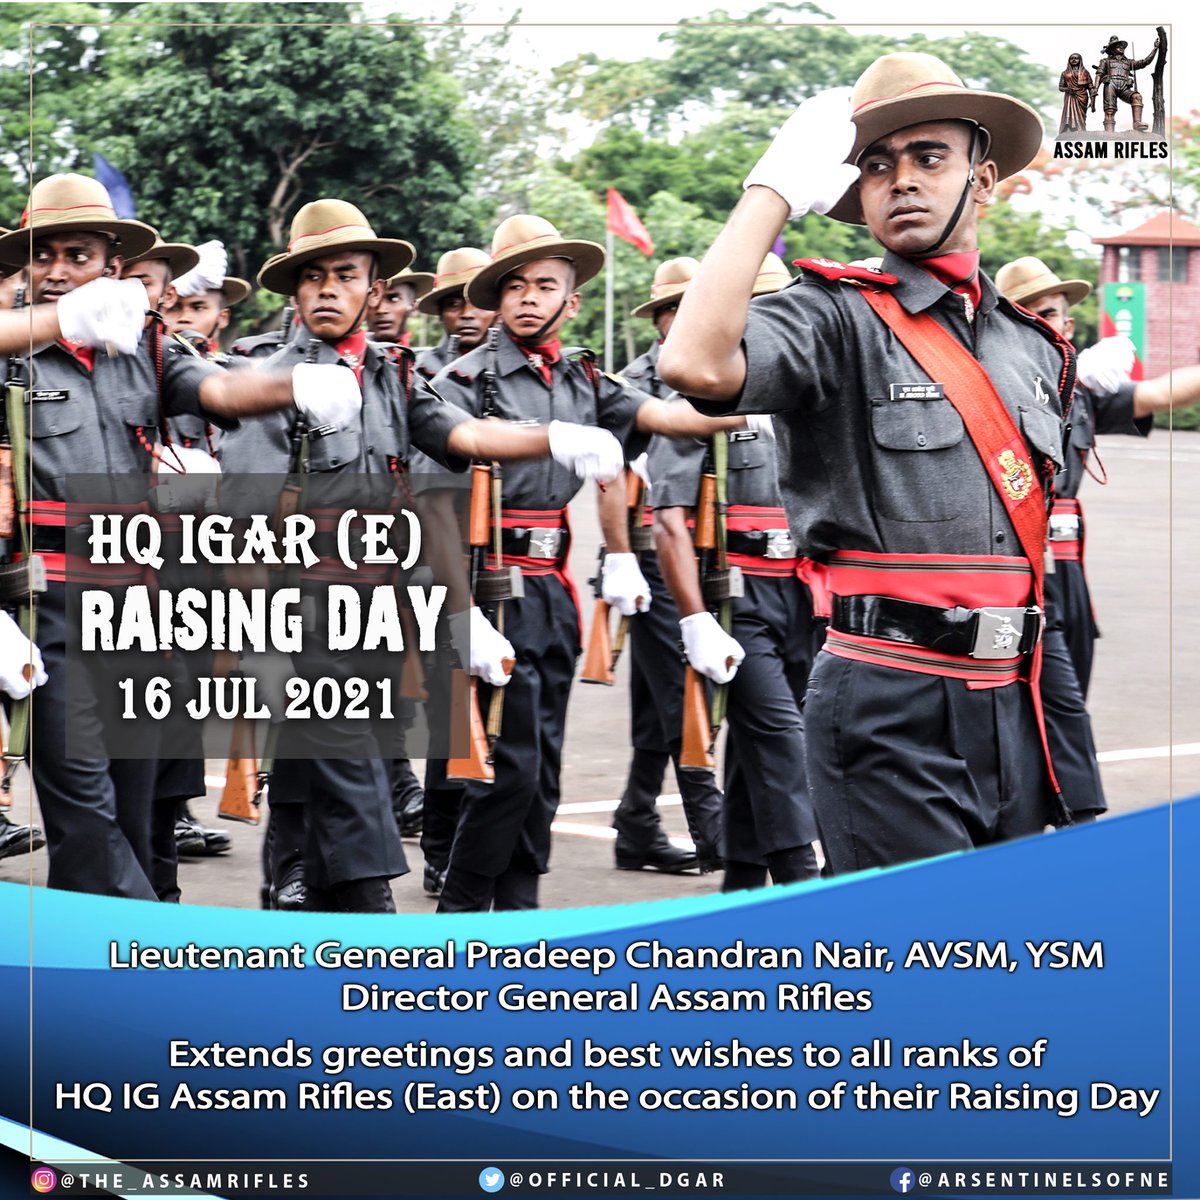 Lieutenant General Pradeep Chandran Nair, AVSM, YSM, Director General Assam Rifles Extends Greetings and Best Wishes to all ranks of IGAR (East) on the occasion of their Raising Day.
#AssamRifles #sentinelsofnortheast #freindsofnortheastpeople #raisingday #greetings #Bestwishes